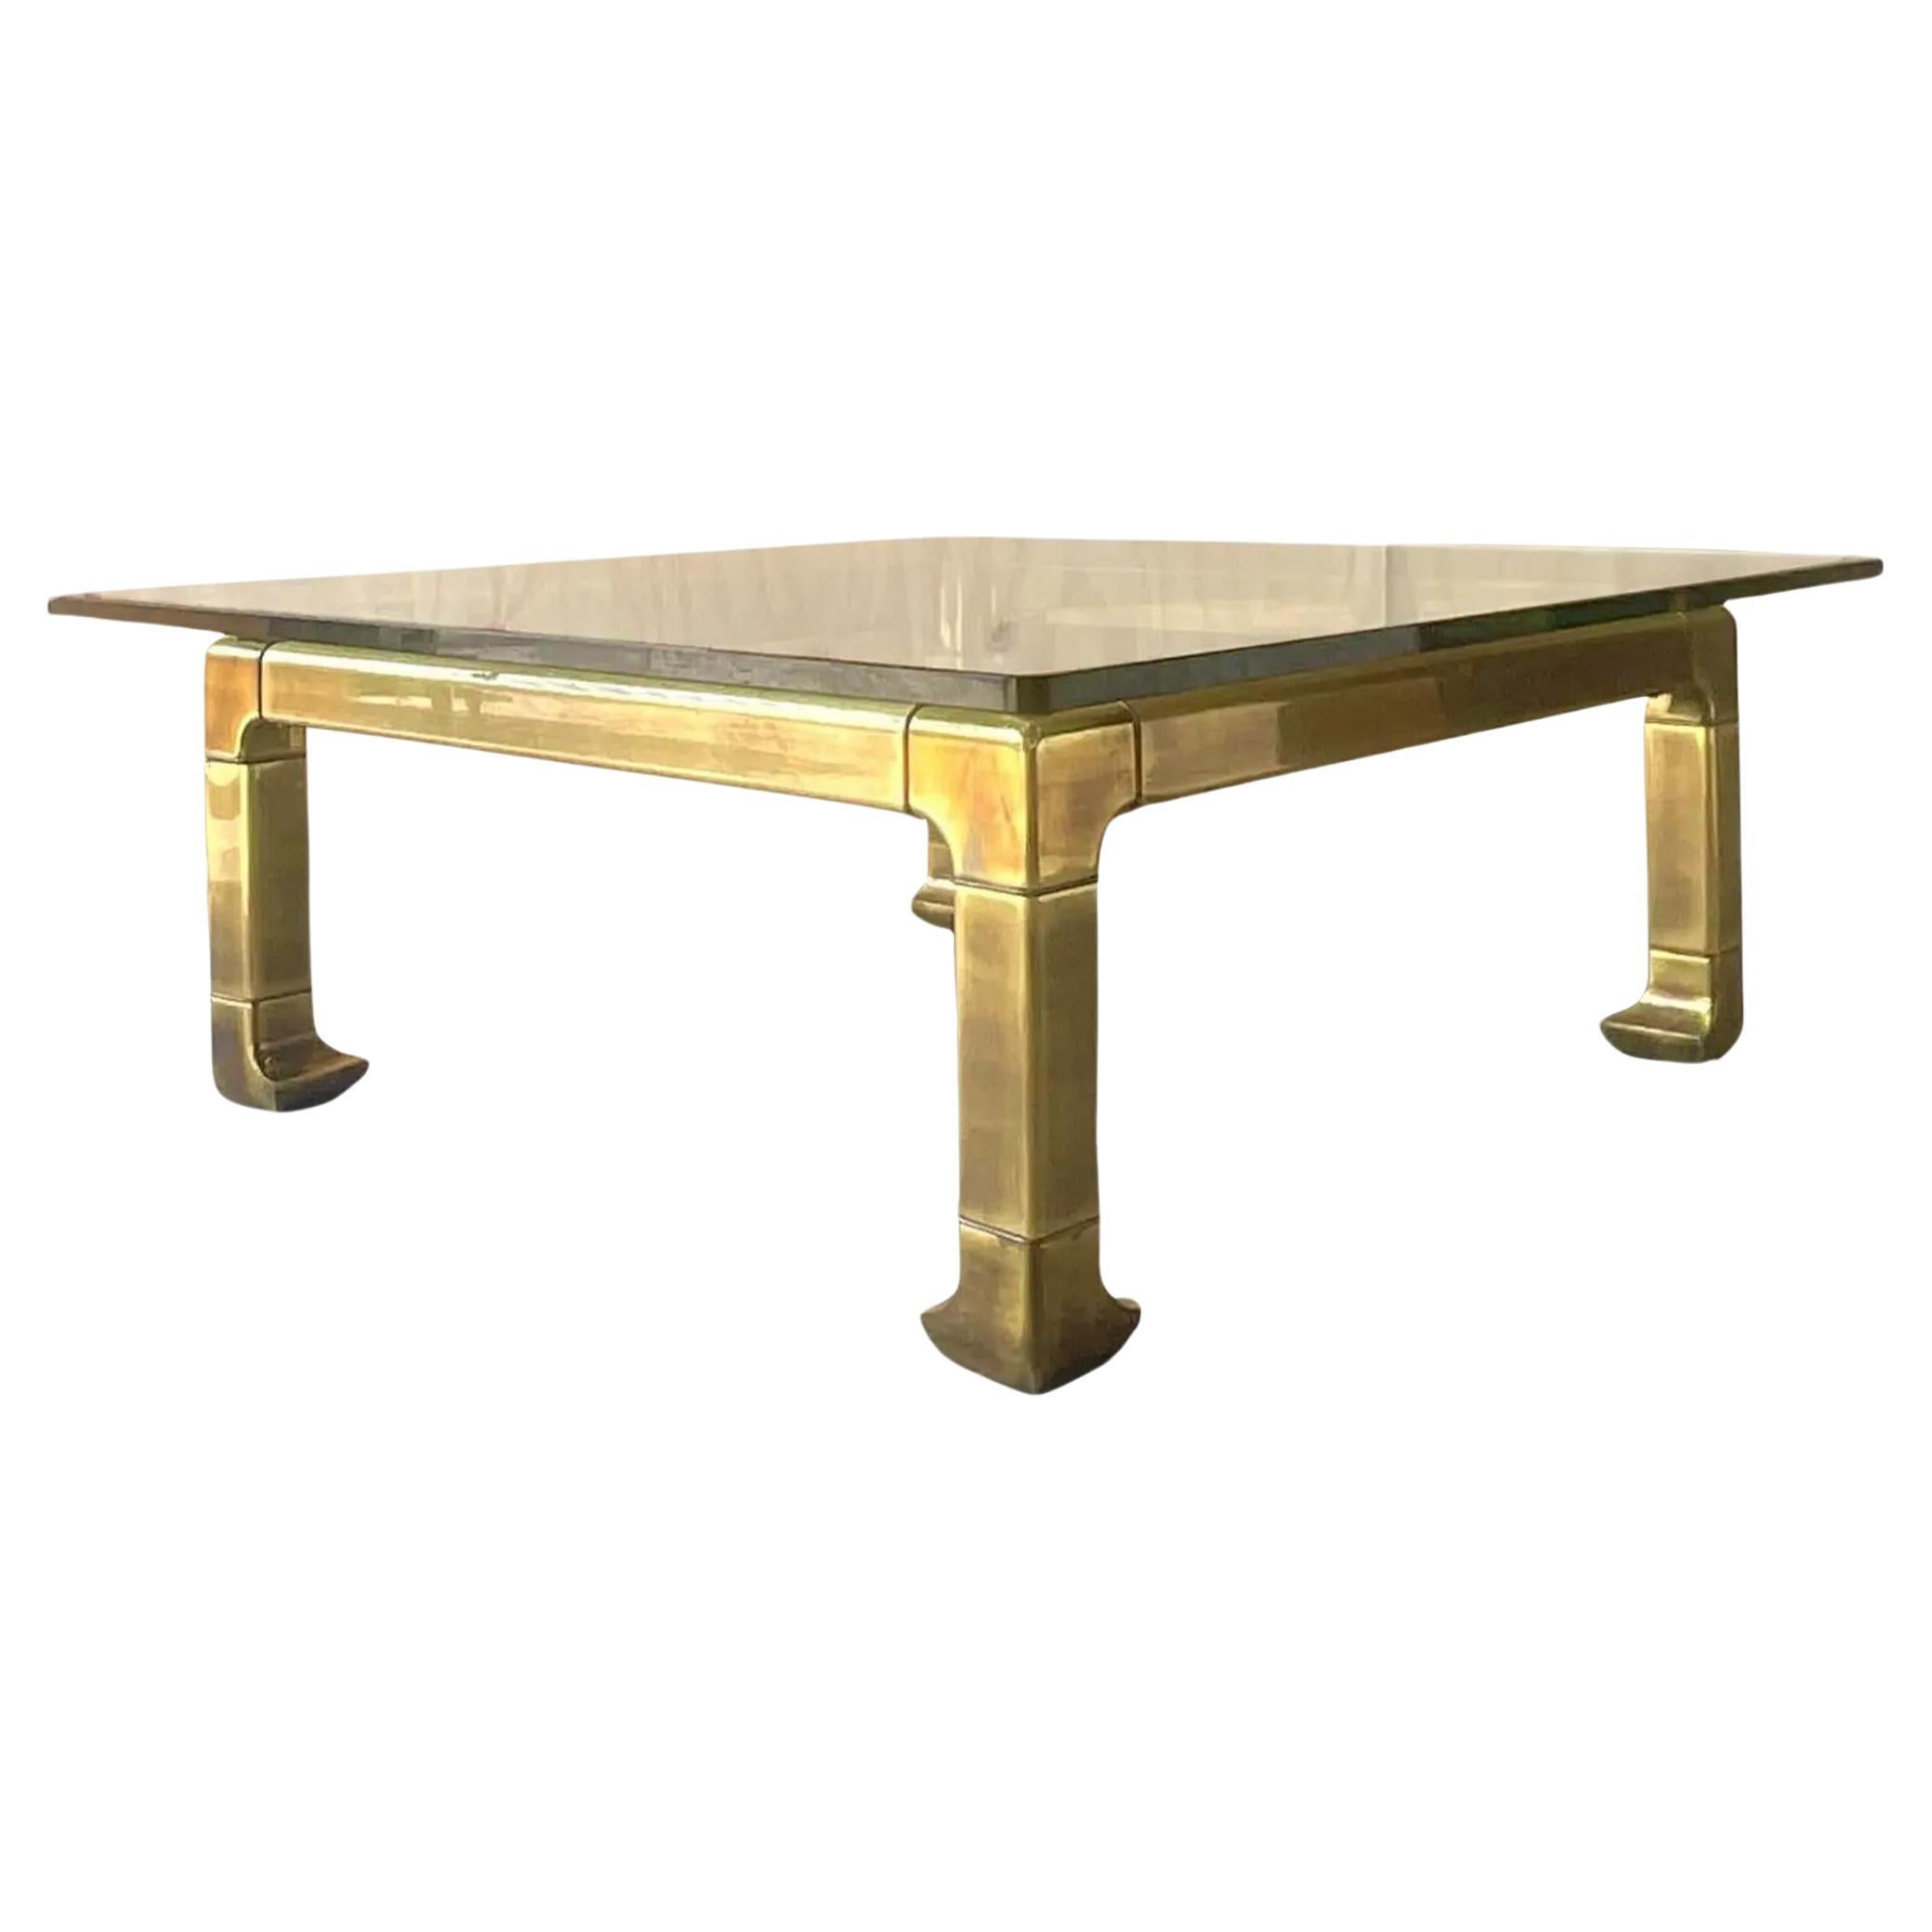 Late 20th Century Vintage Regency Brass Coffee Table After Mastercraft For Sale